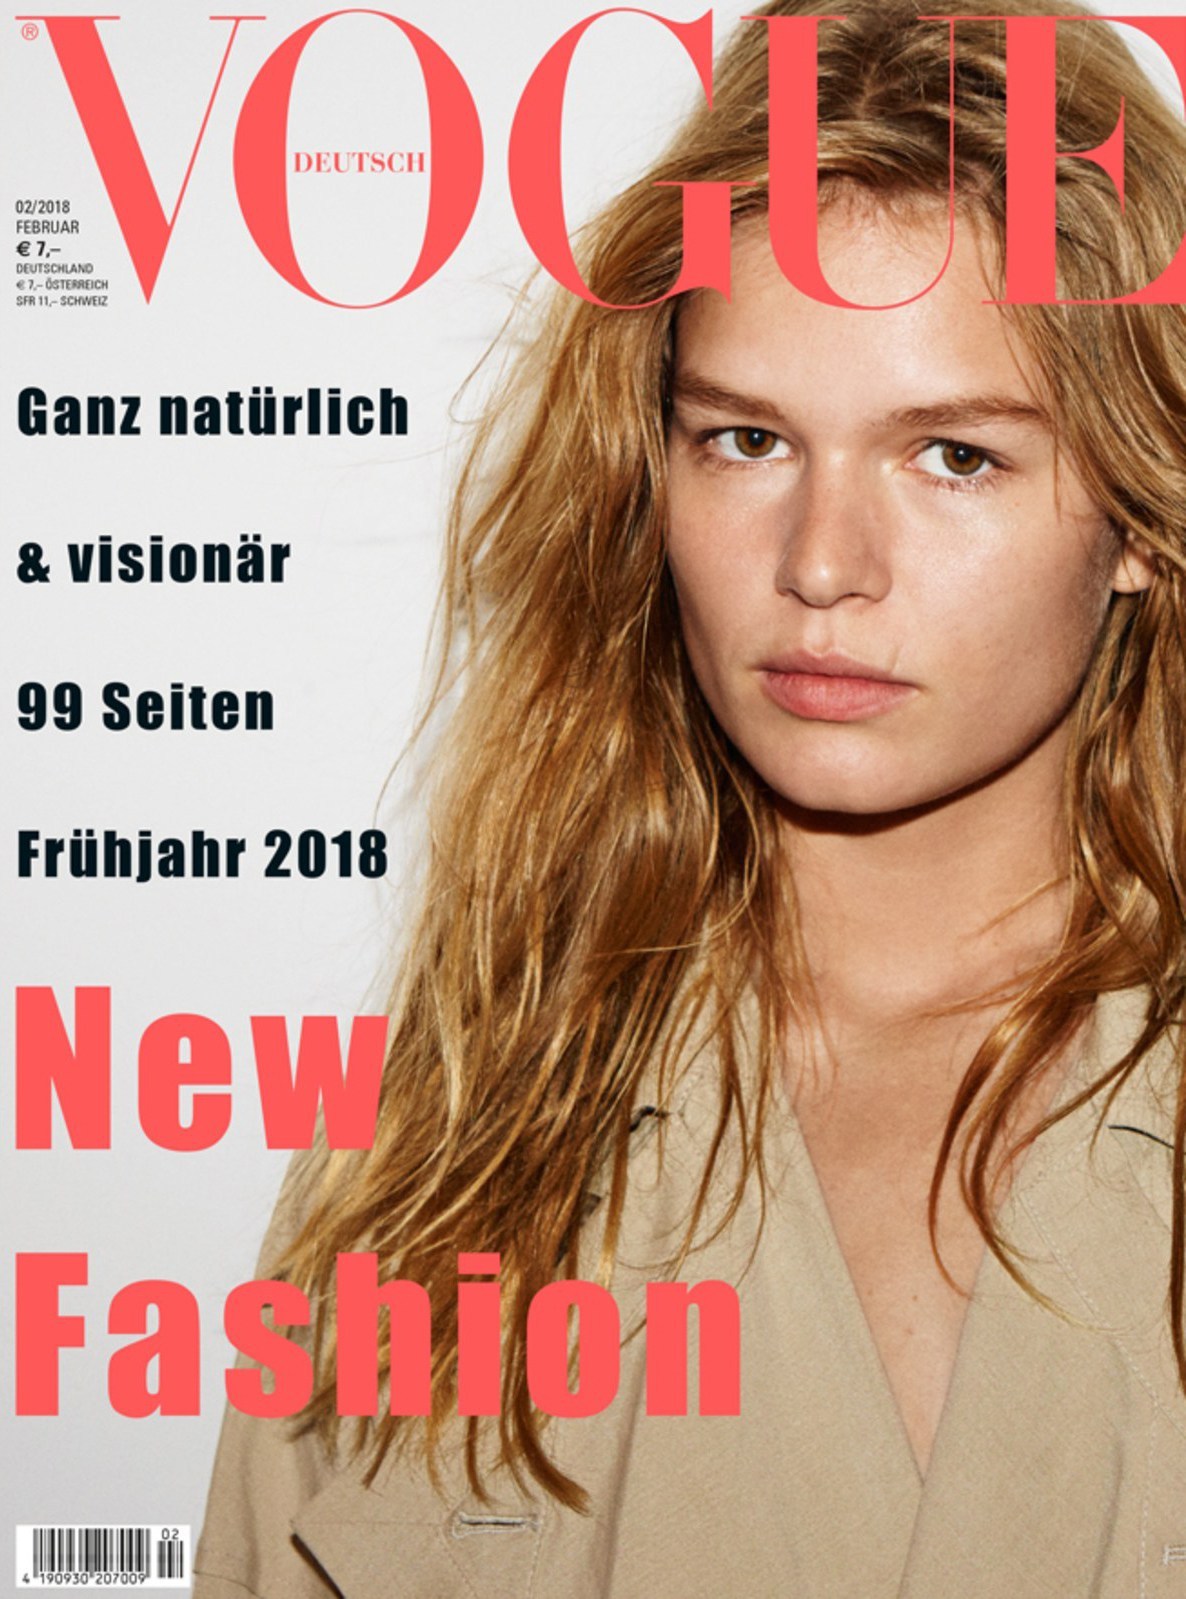 Photo #24496 from Vogue Germany February 2018